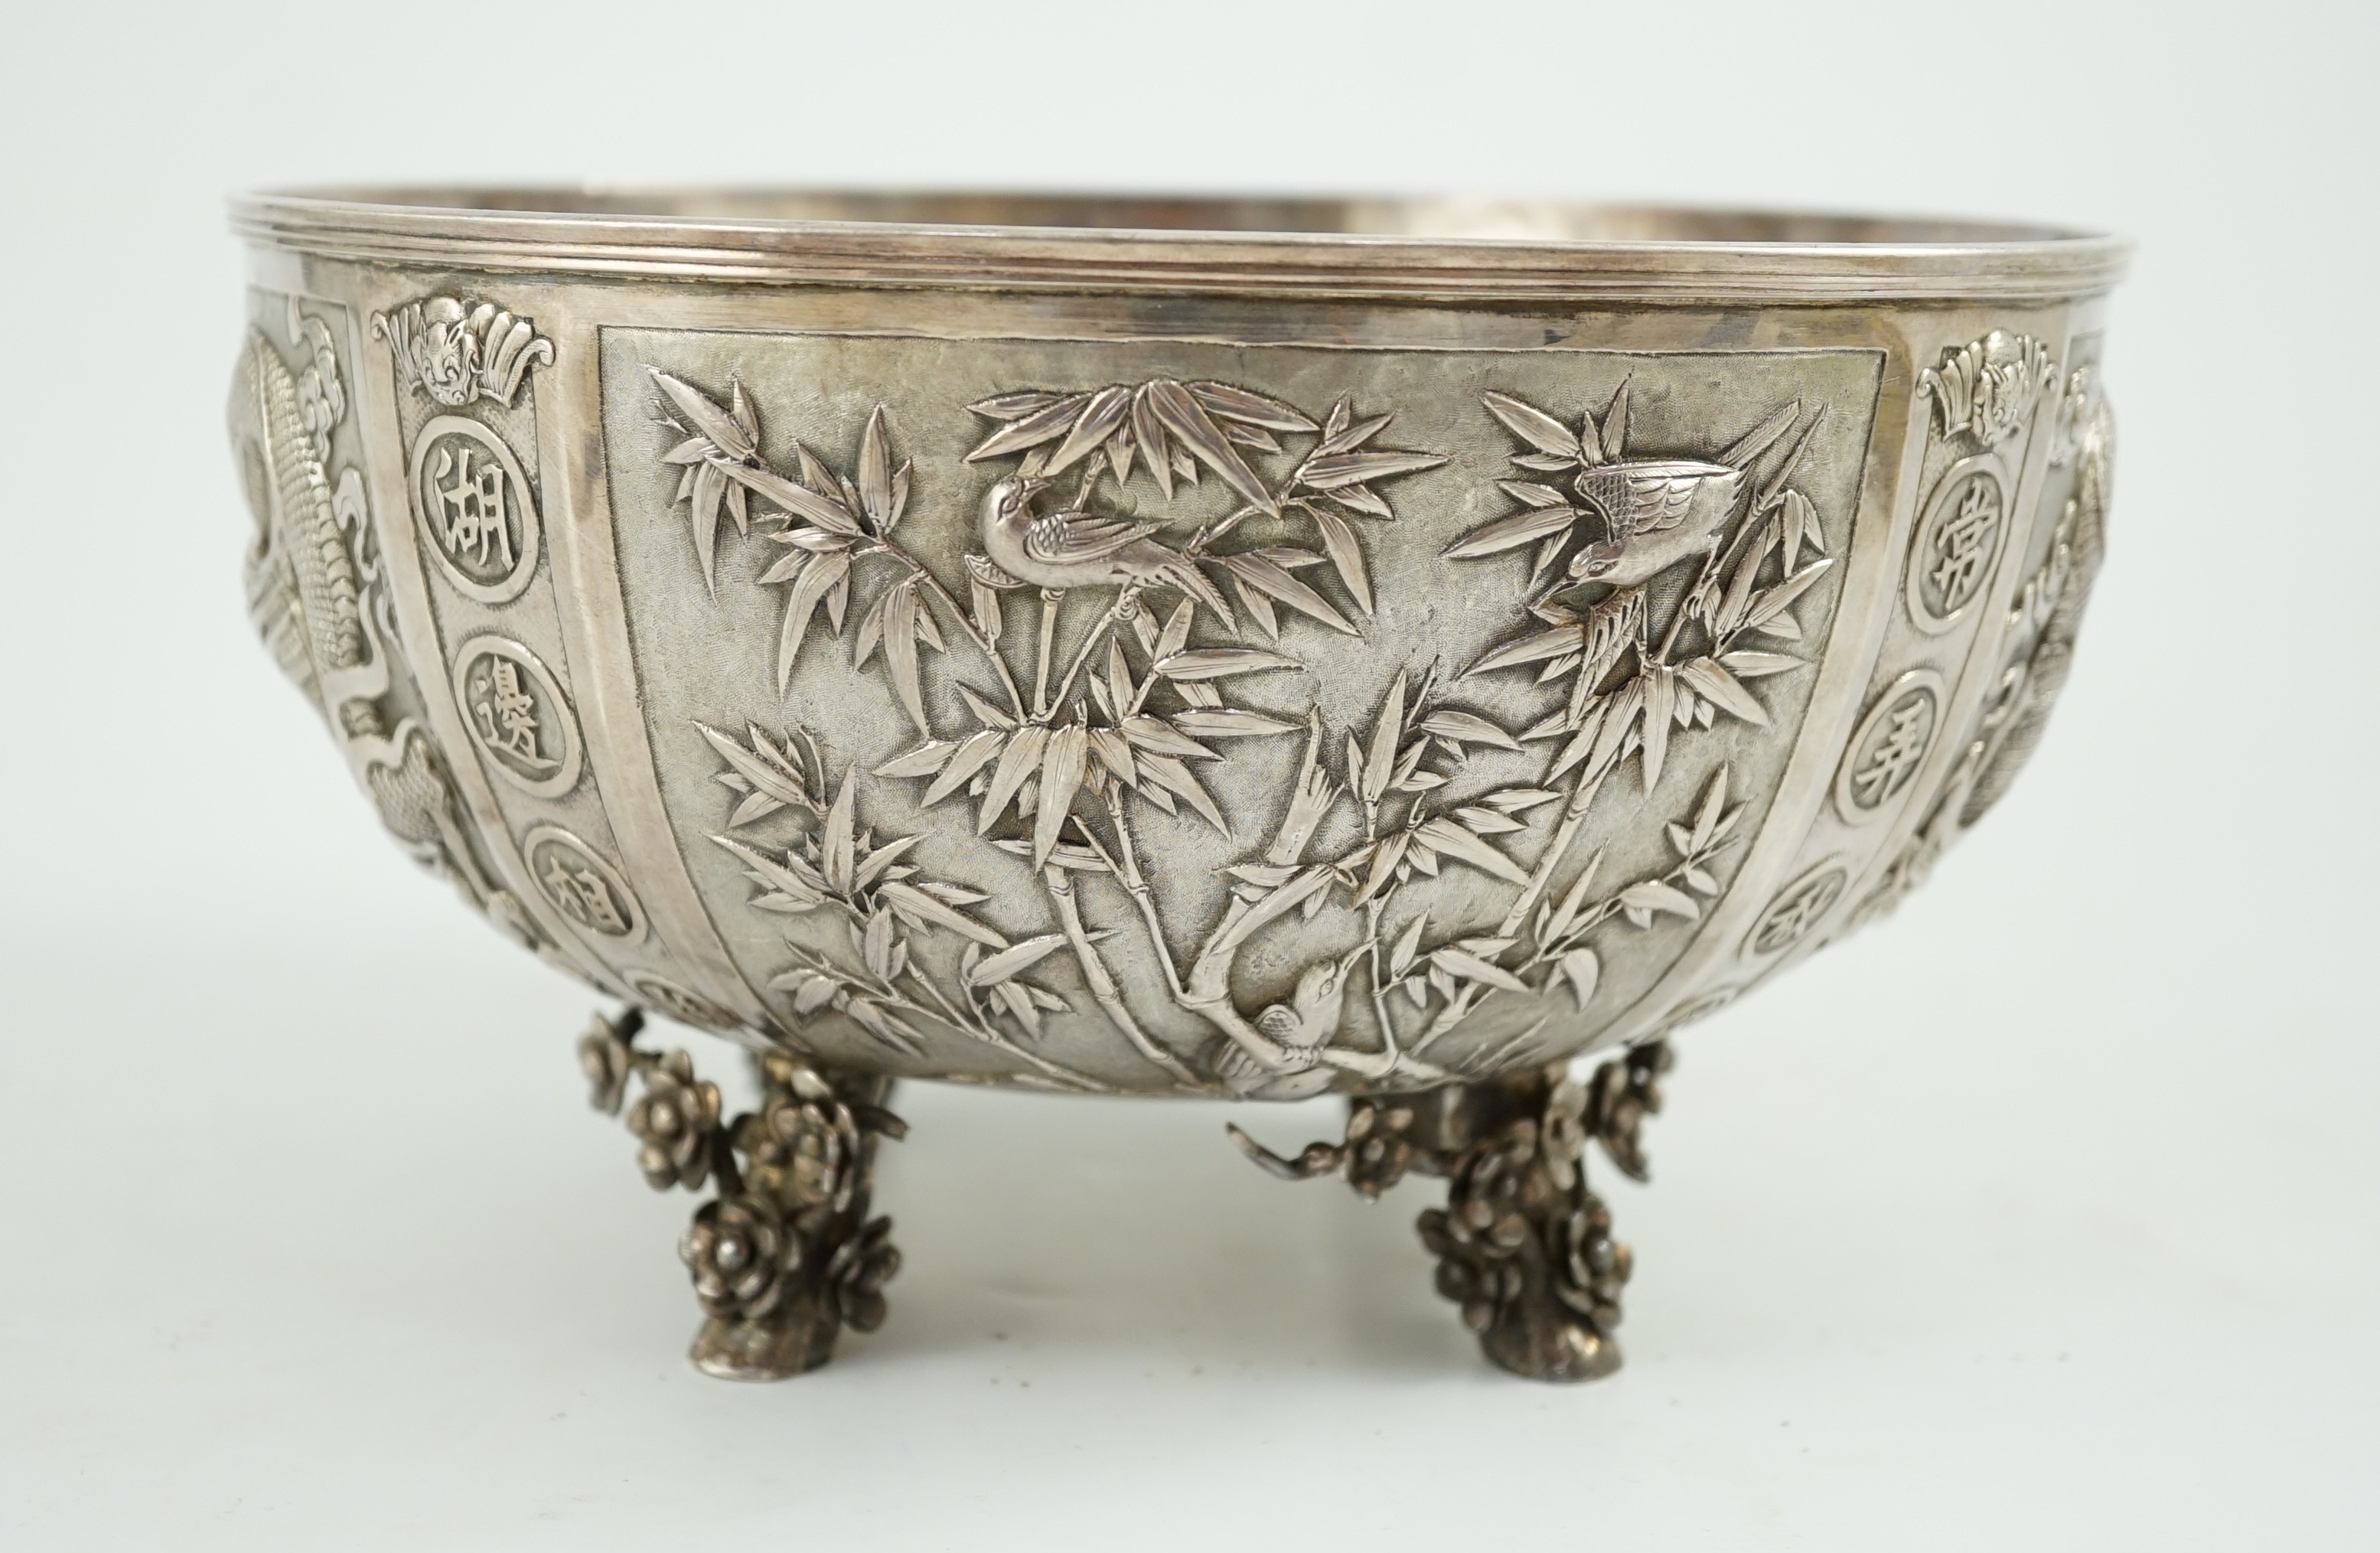 A late 19th/early 20th century Chinese Export silver rose bowl